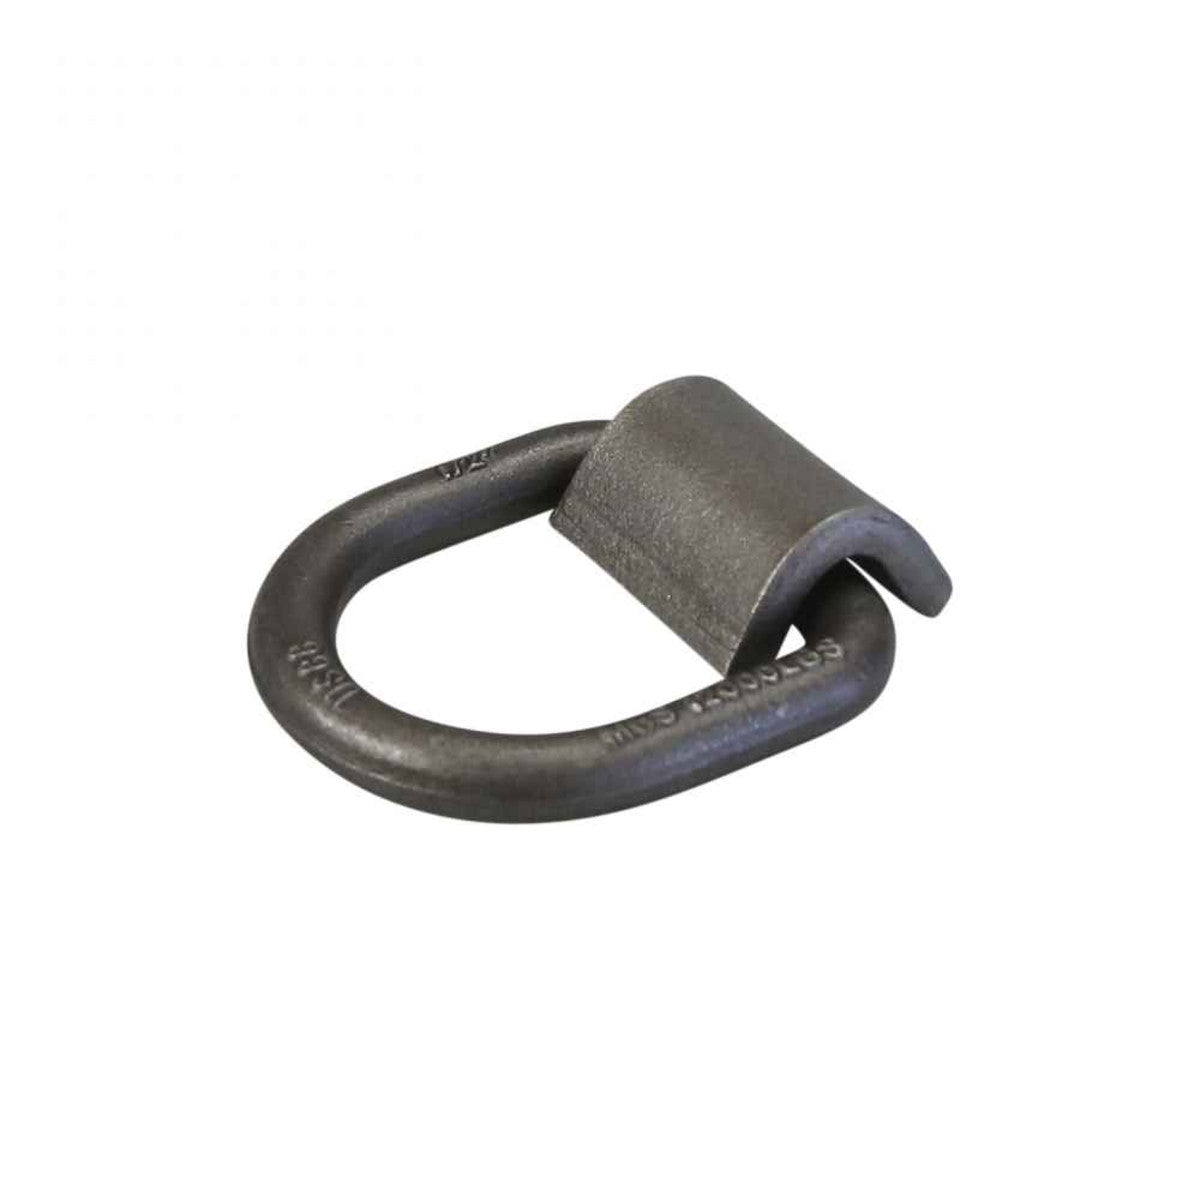 1/2" Lashing Ring Weld On Forged Mounting Ring - 12,000 lbs